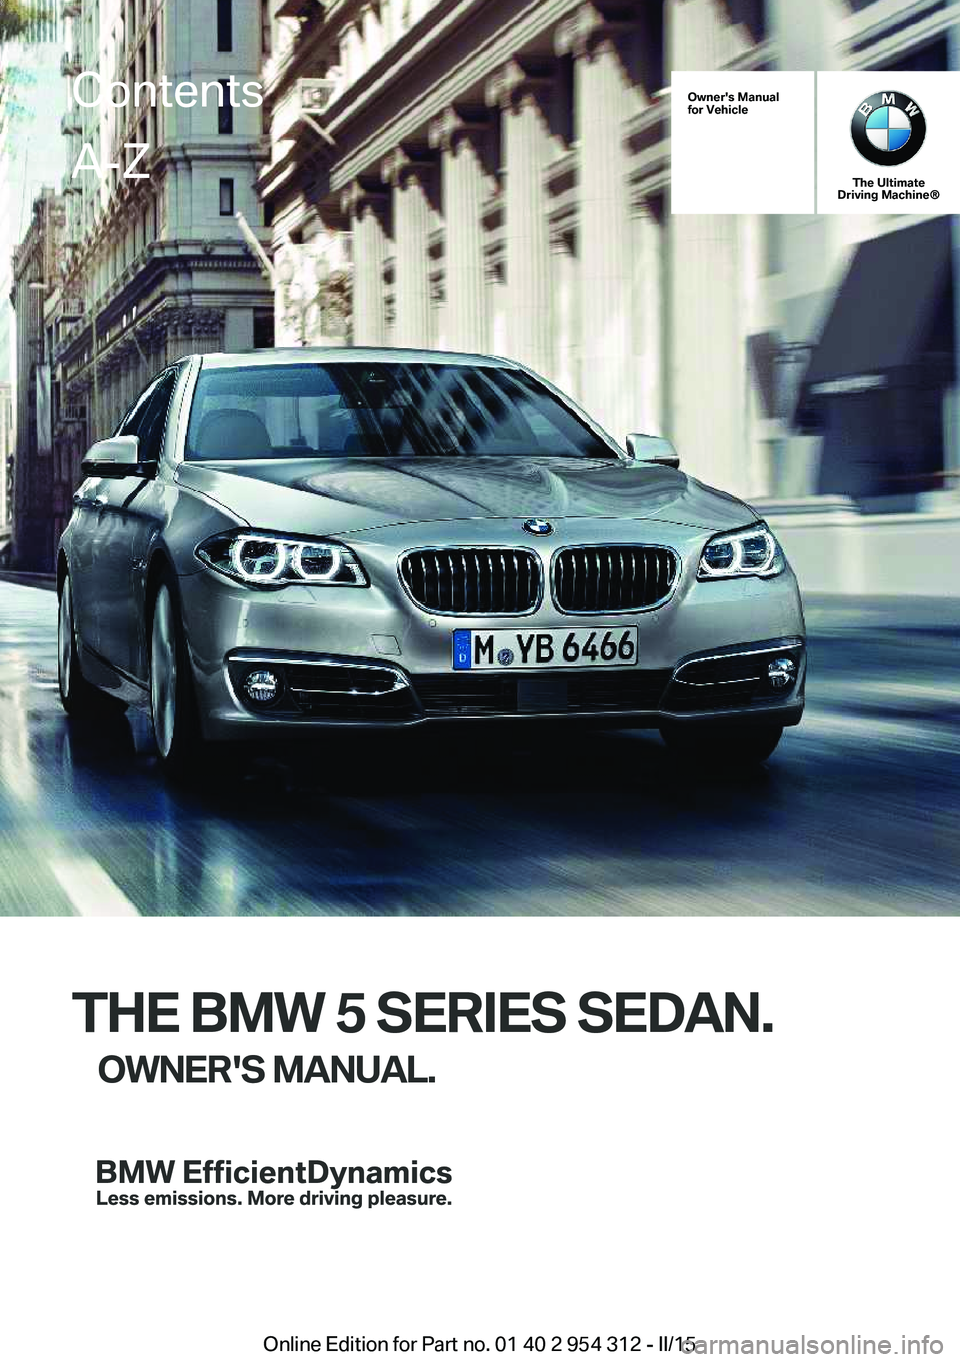 BMW 535I XDRIVE SEDAN 2015  Owners Manual Owner's Manual
for Vehicle
The Ultimate
Driving Machine®
THE BMW 5 SERIES SEDAN.
OWNER'S MANUAL.
ContentsA-Z
Online Edition for Part no. 01 40 2 954 312 - II/15   